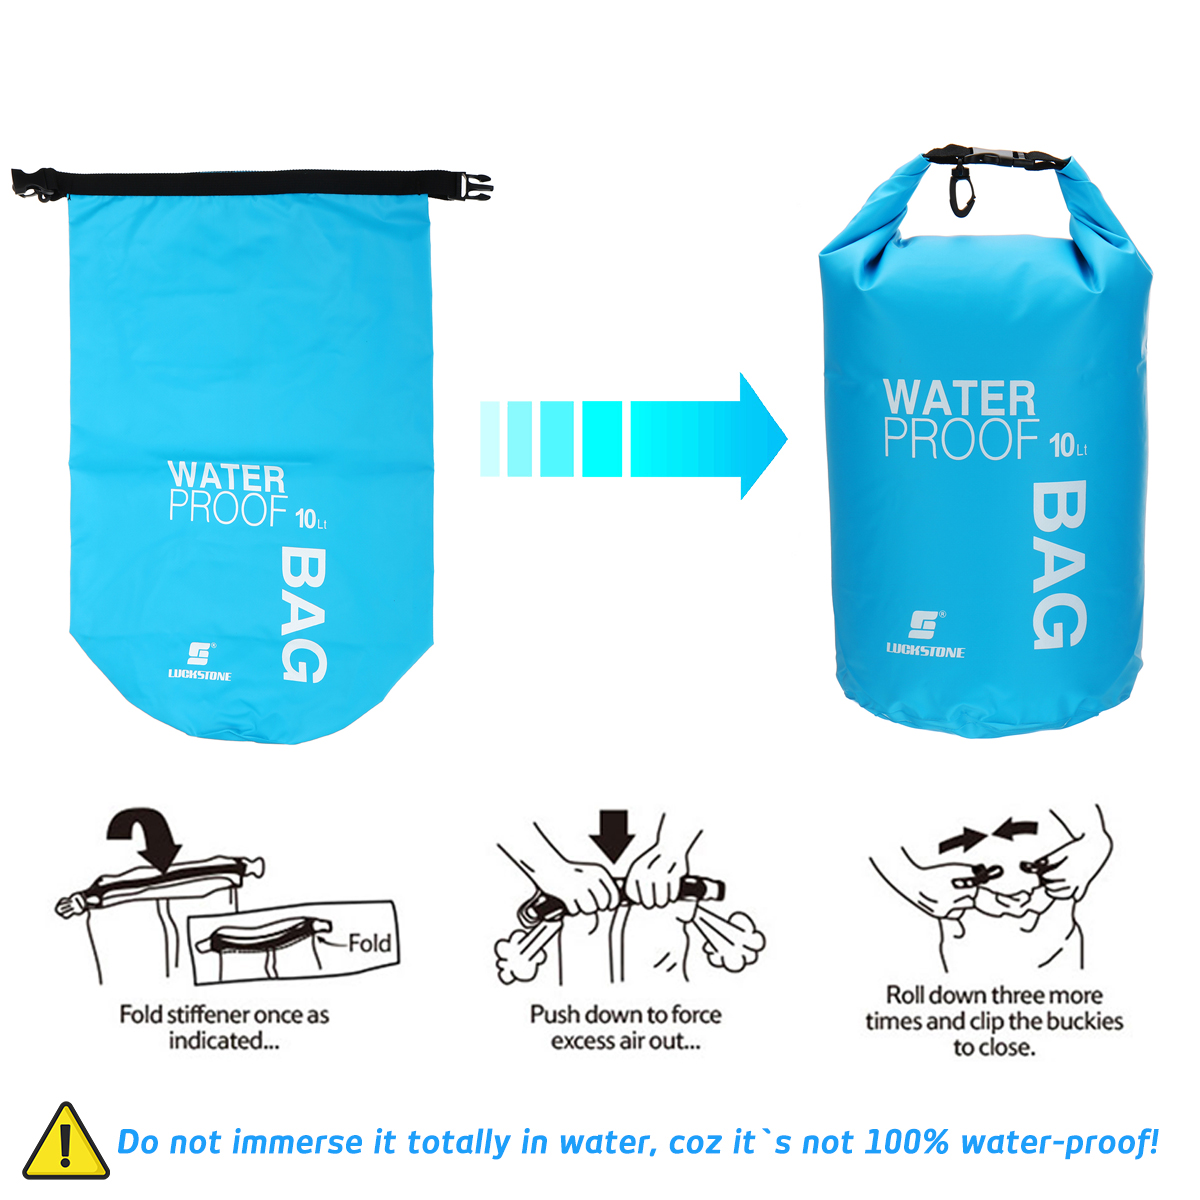 10L-Outdoor-Swimming-Air-Inflation-Floating-Mobile-Phone-Camera-Storage-PVC-Waterproof-Bag-1820807-3